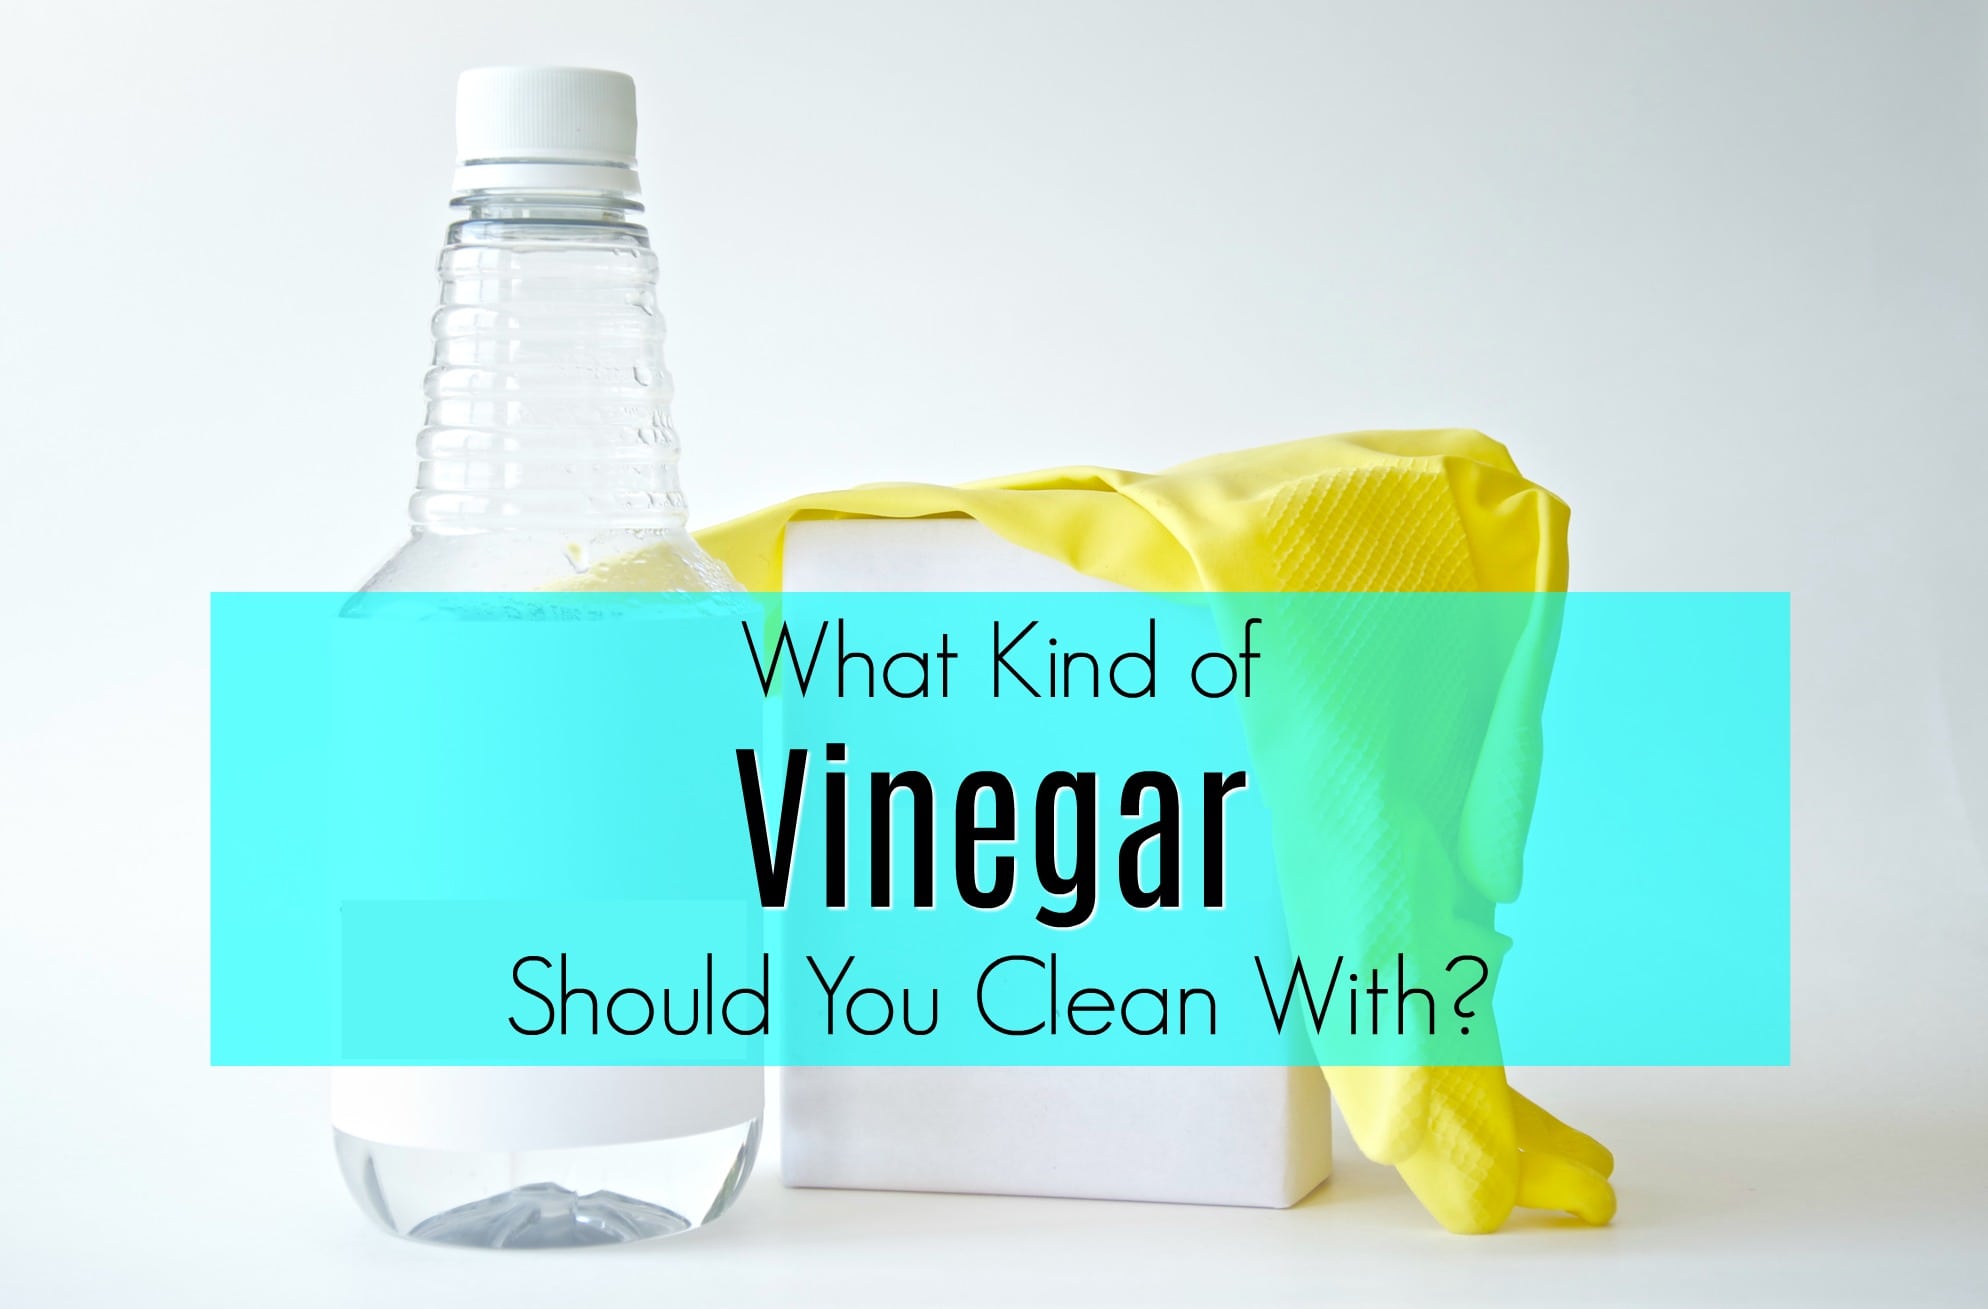 How to Use Vinegar to Remove Stains from Pots and Pans